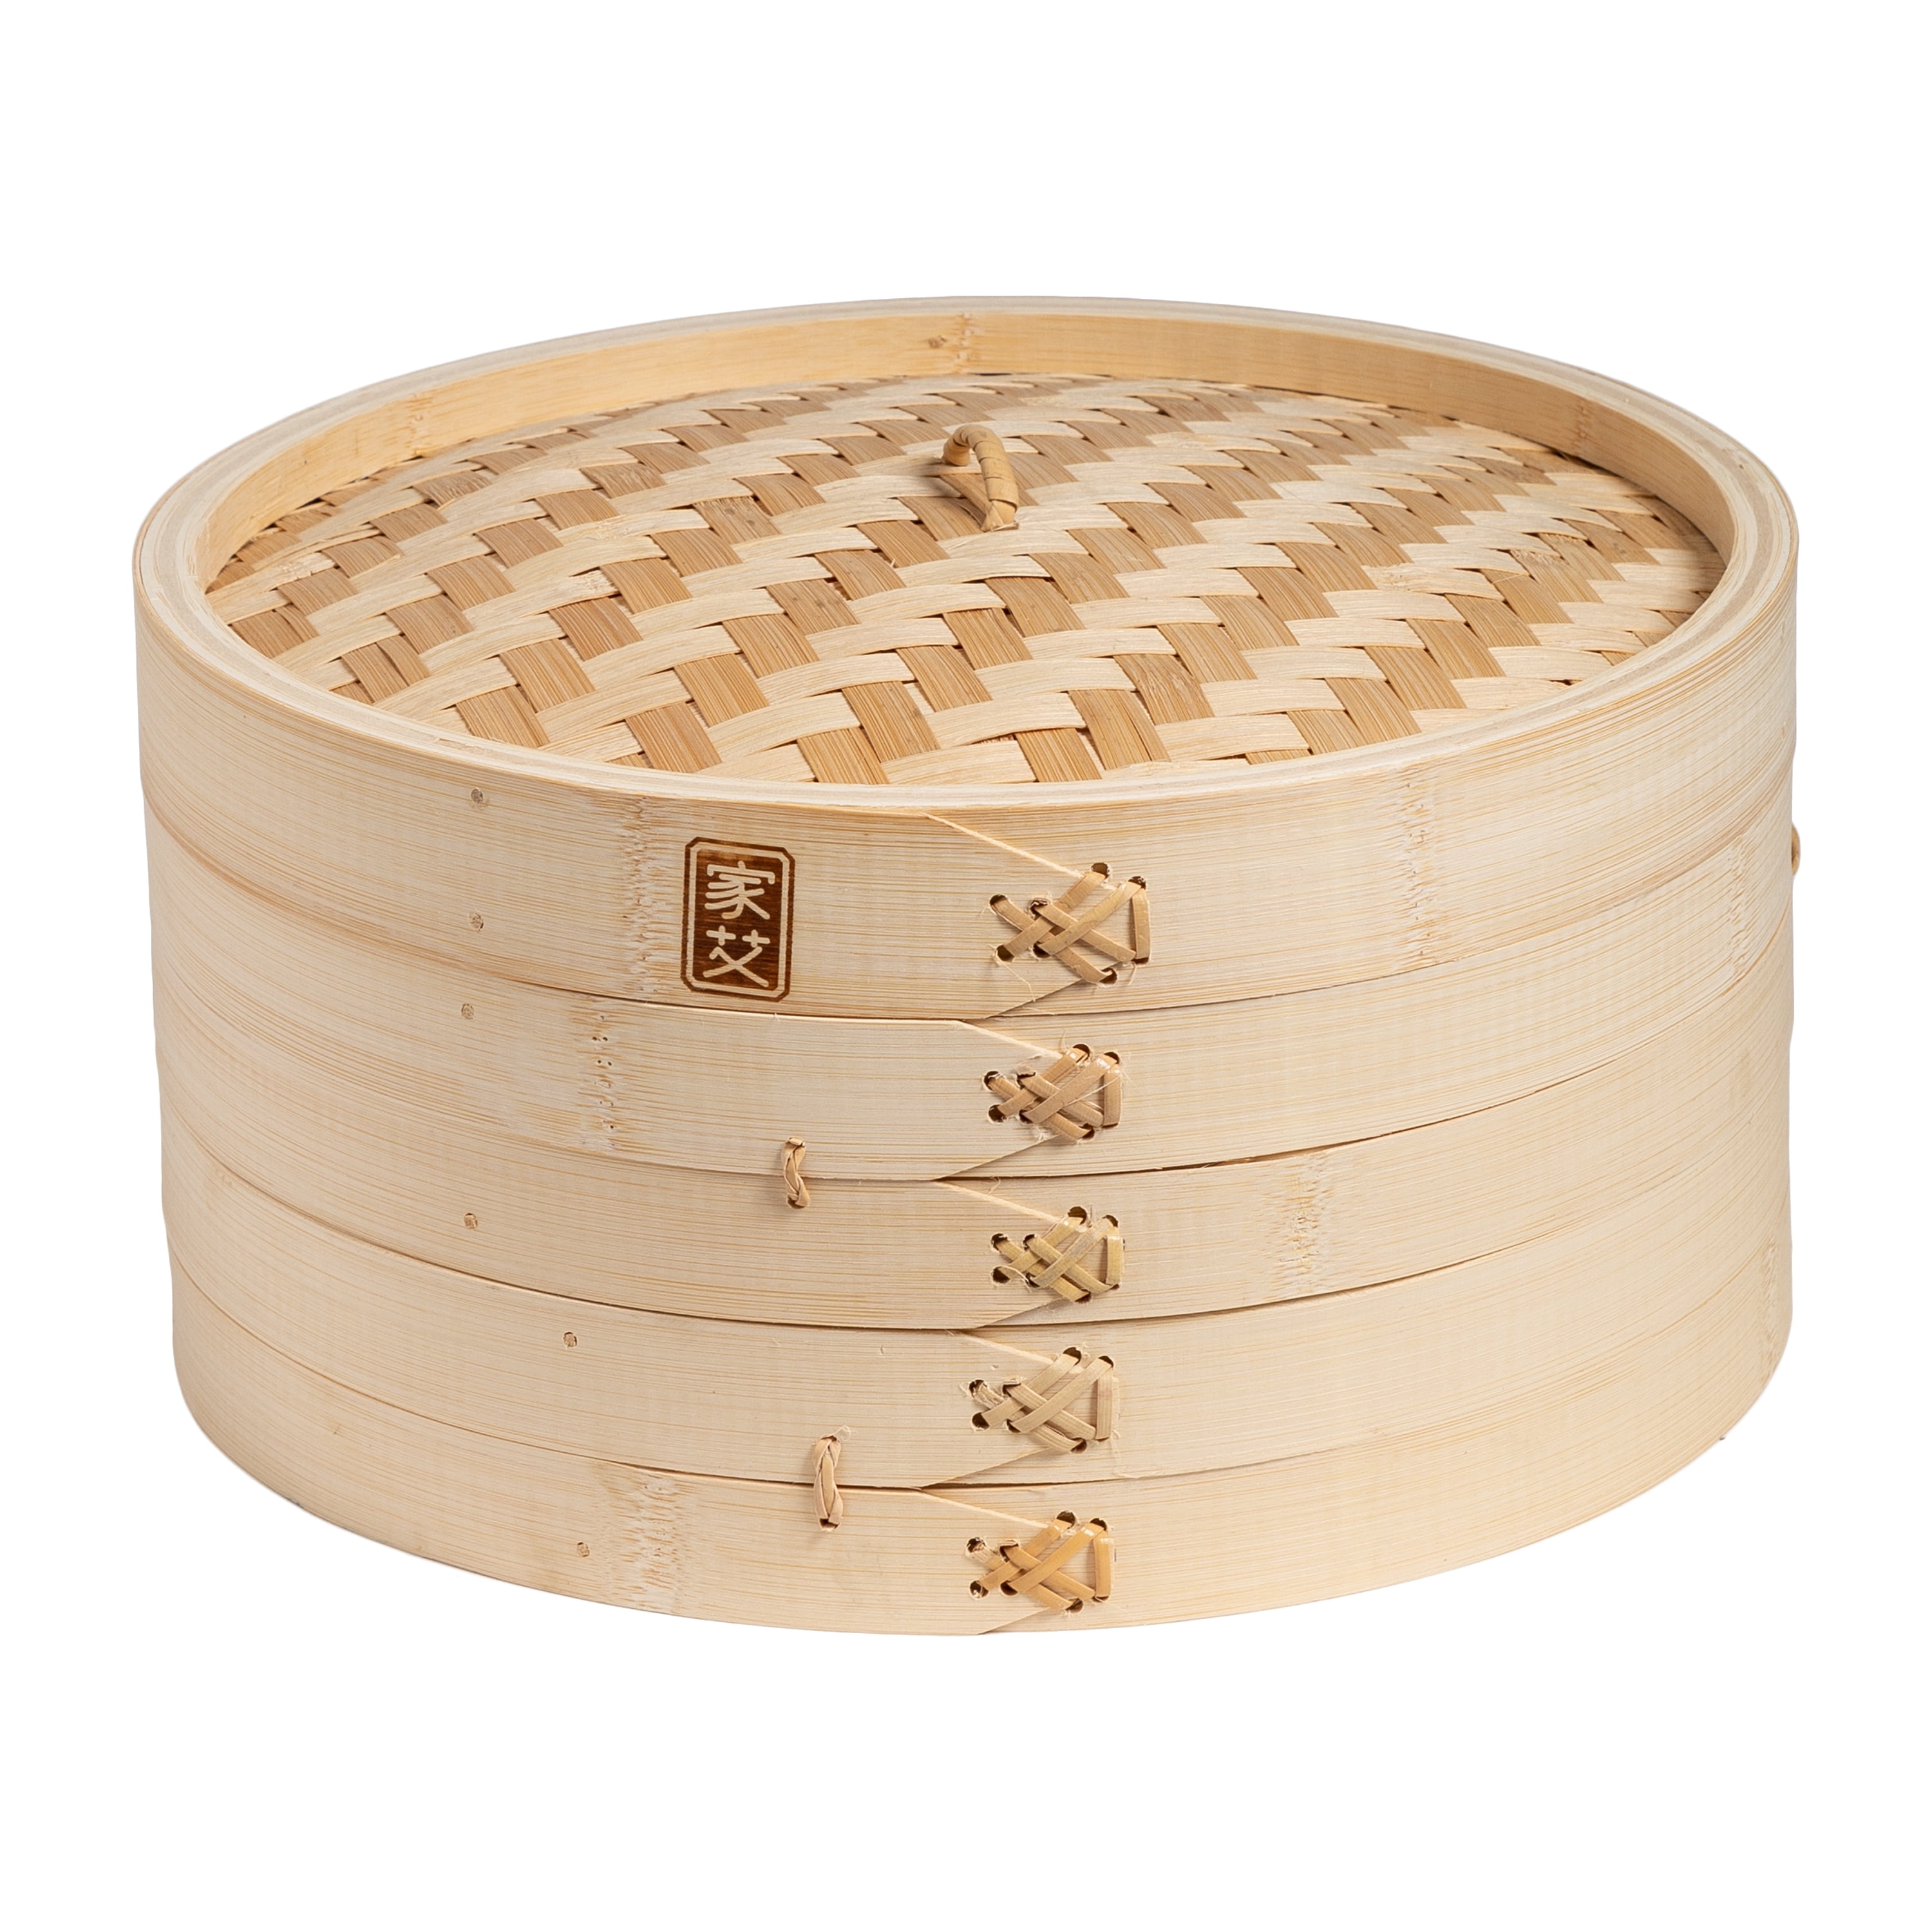 LEYENDAS Bamboo Steamer for Steaming Steamer 25x16 cm Bamboo Cooking with Lid Bamboo Basket Oriental Bamboo Container 